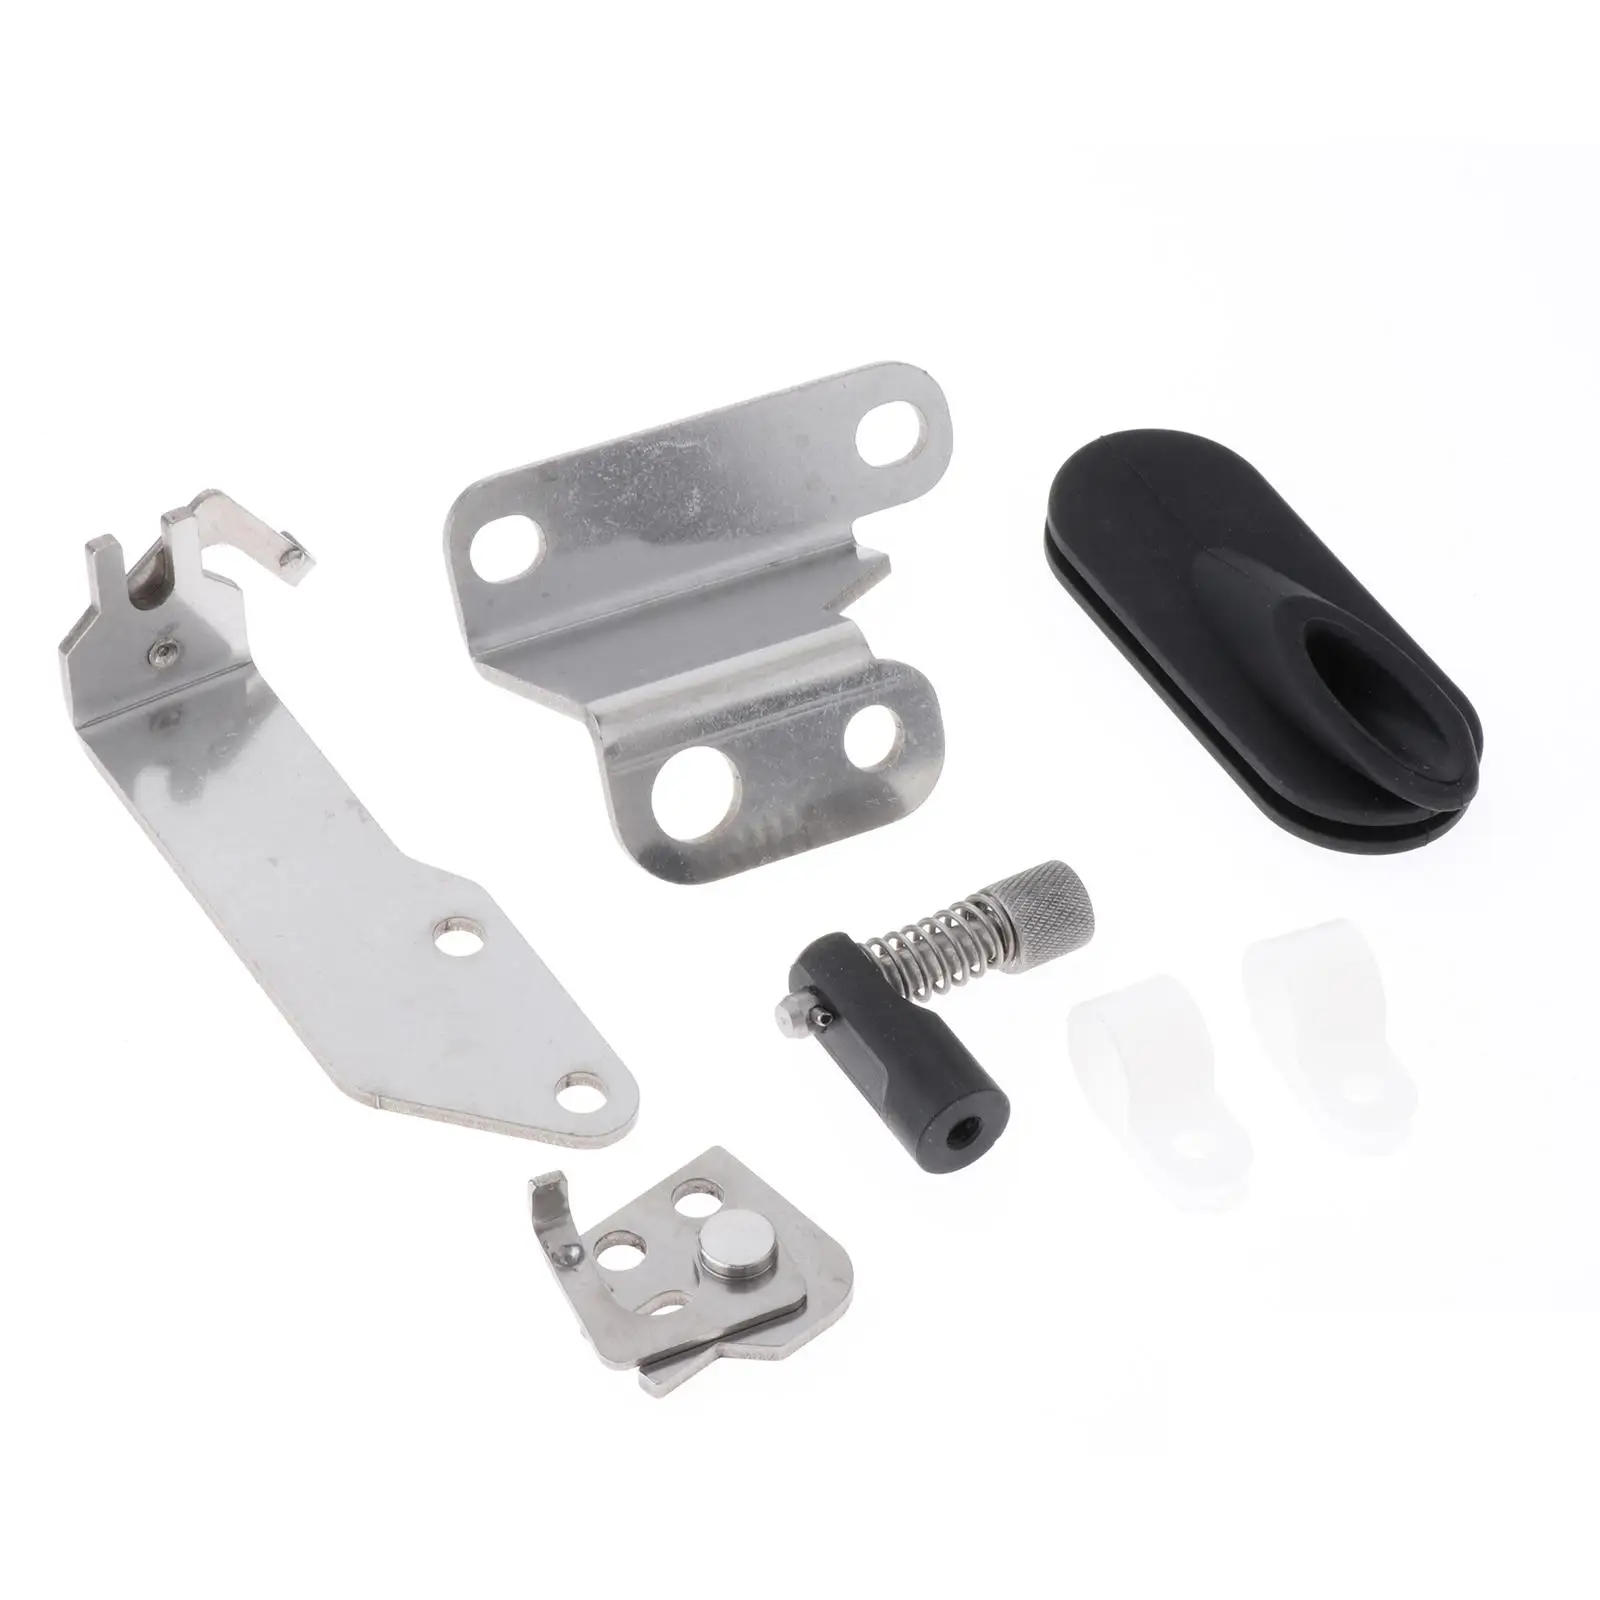 Remote Control Fitting Kit 3A1838801800A0 for  Outboard Motor High 